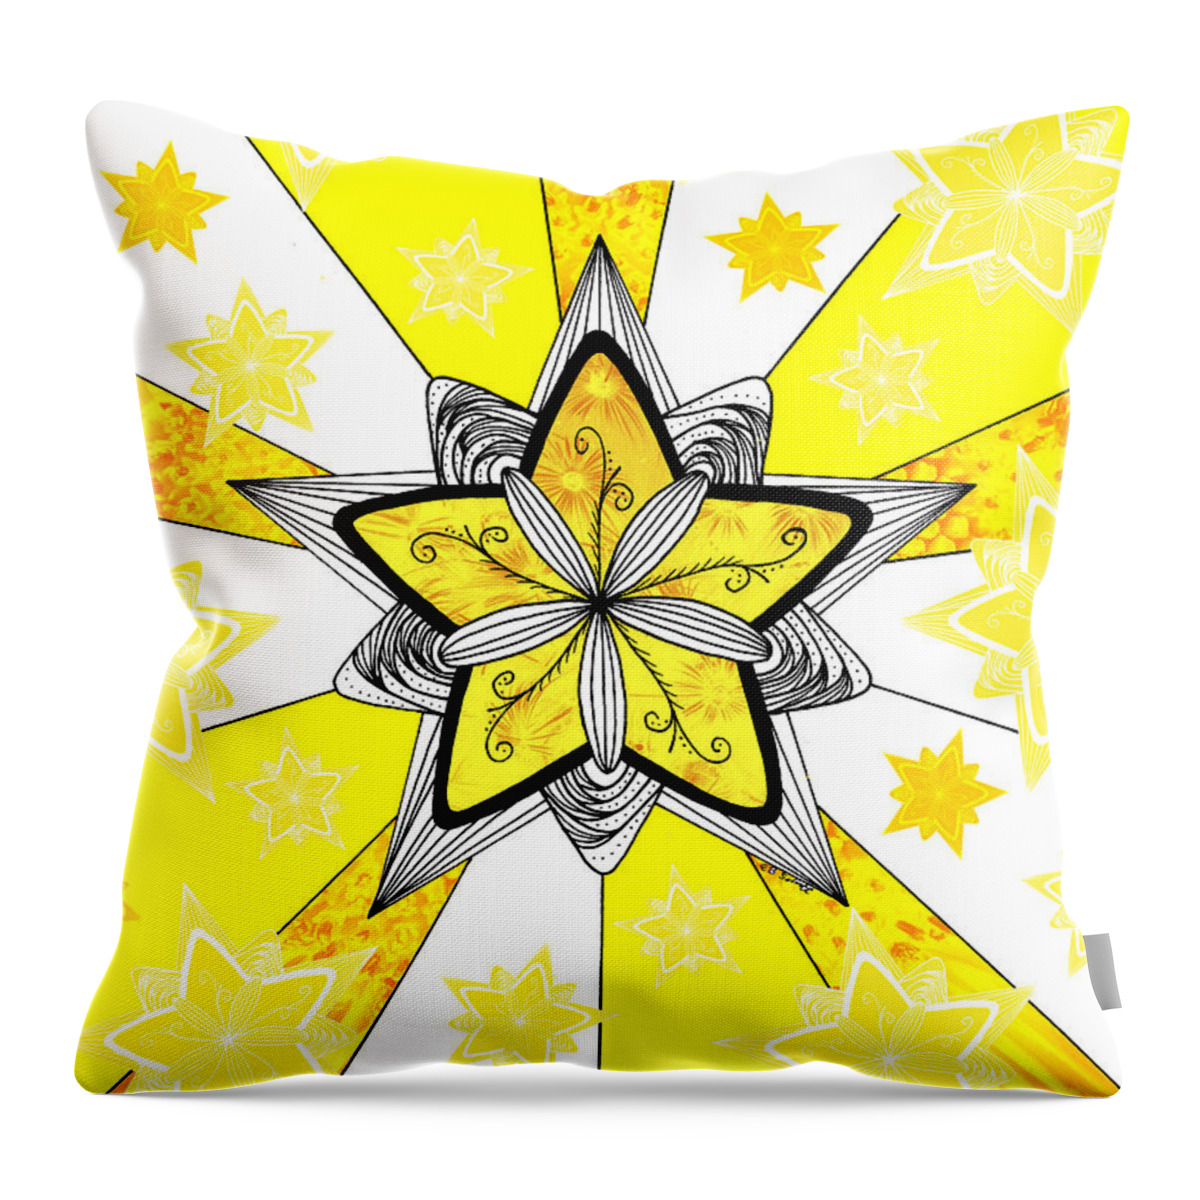 Shining Star Throw Pillow featuring the drawing Shining Star by E B Schmidt